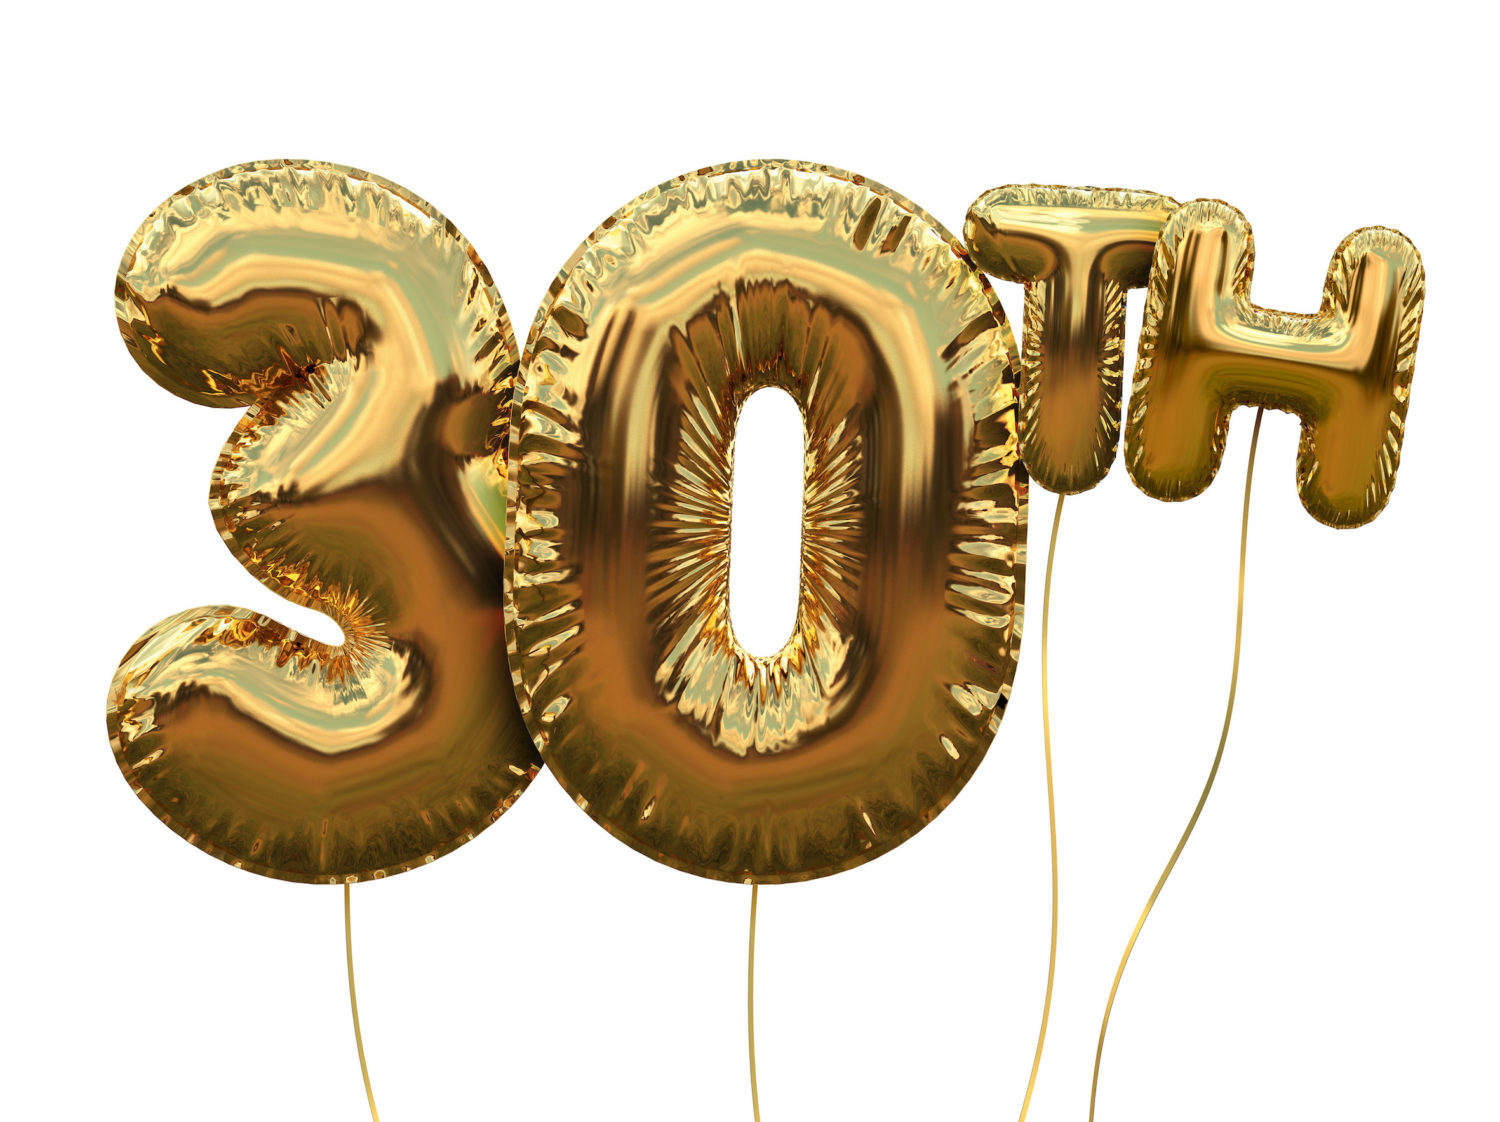 gold-number-30-foil-birthday-balloon-isolated-on-white-golden-party-celebration-3d-rendering